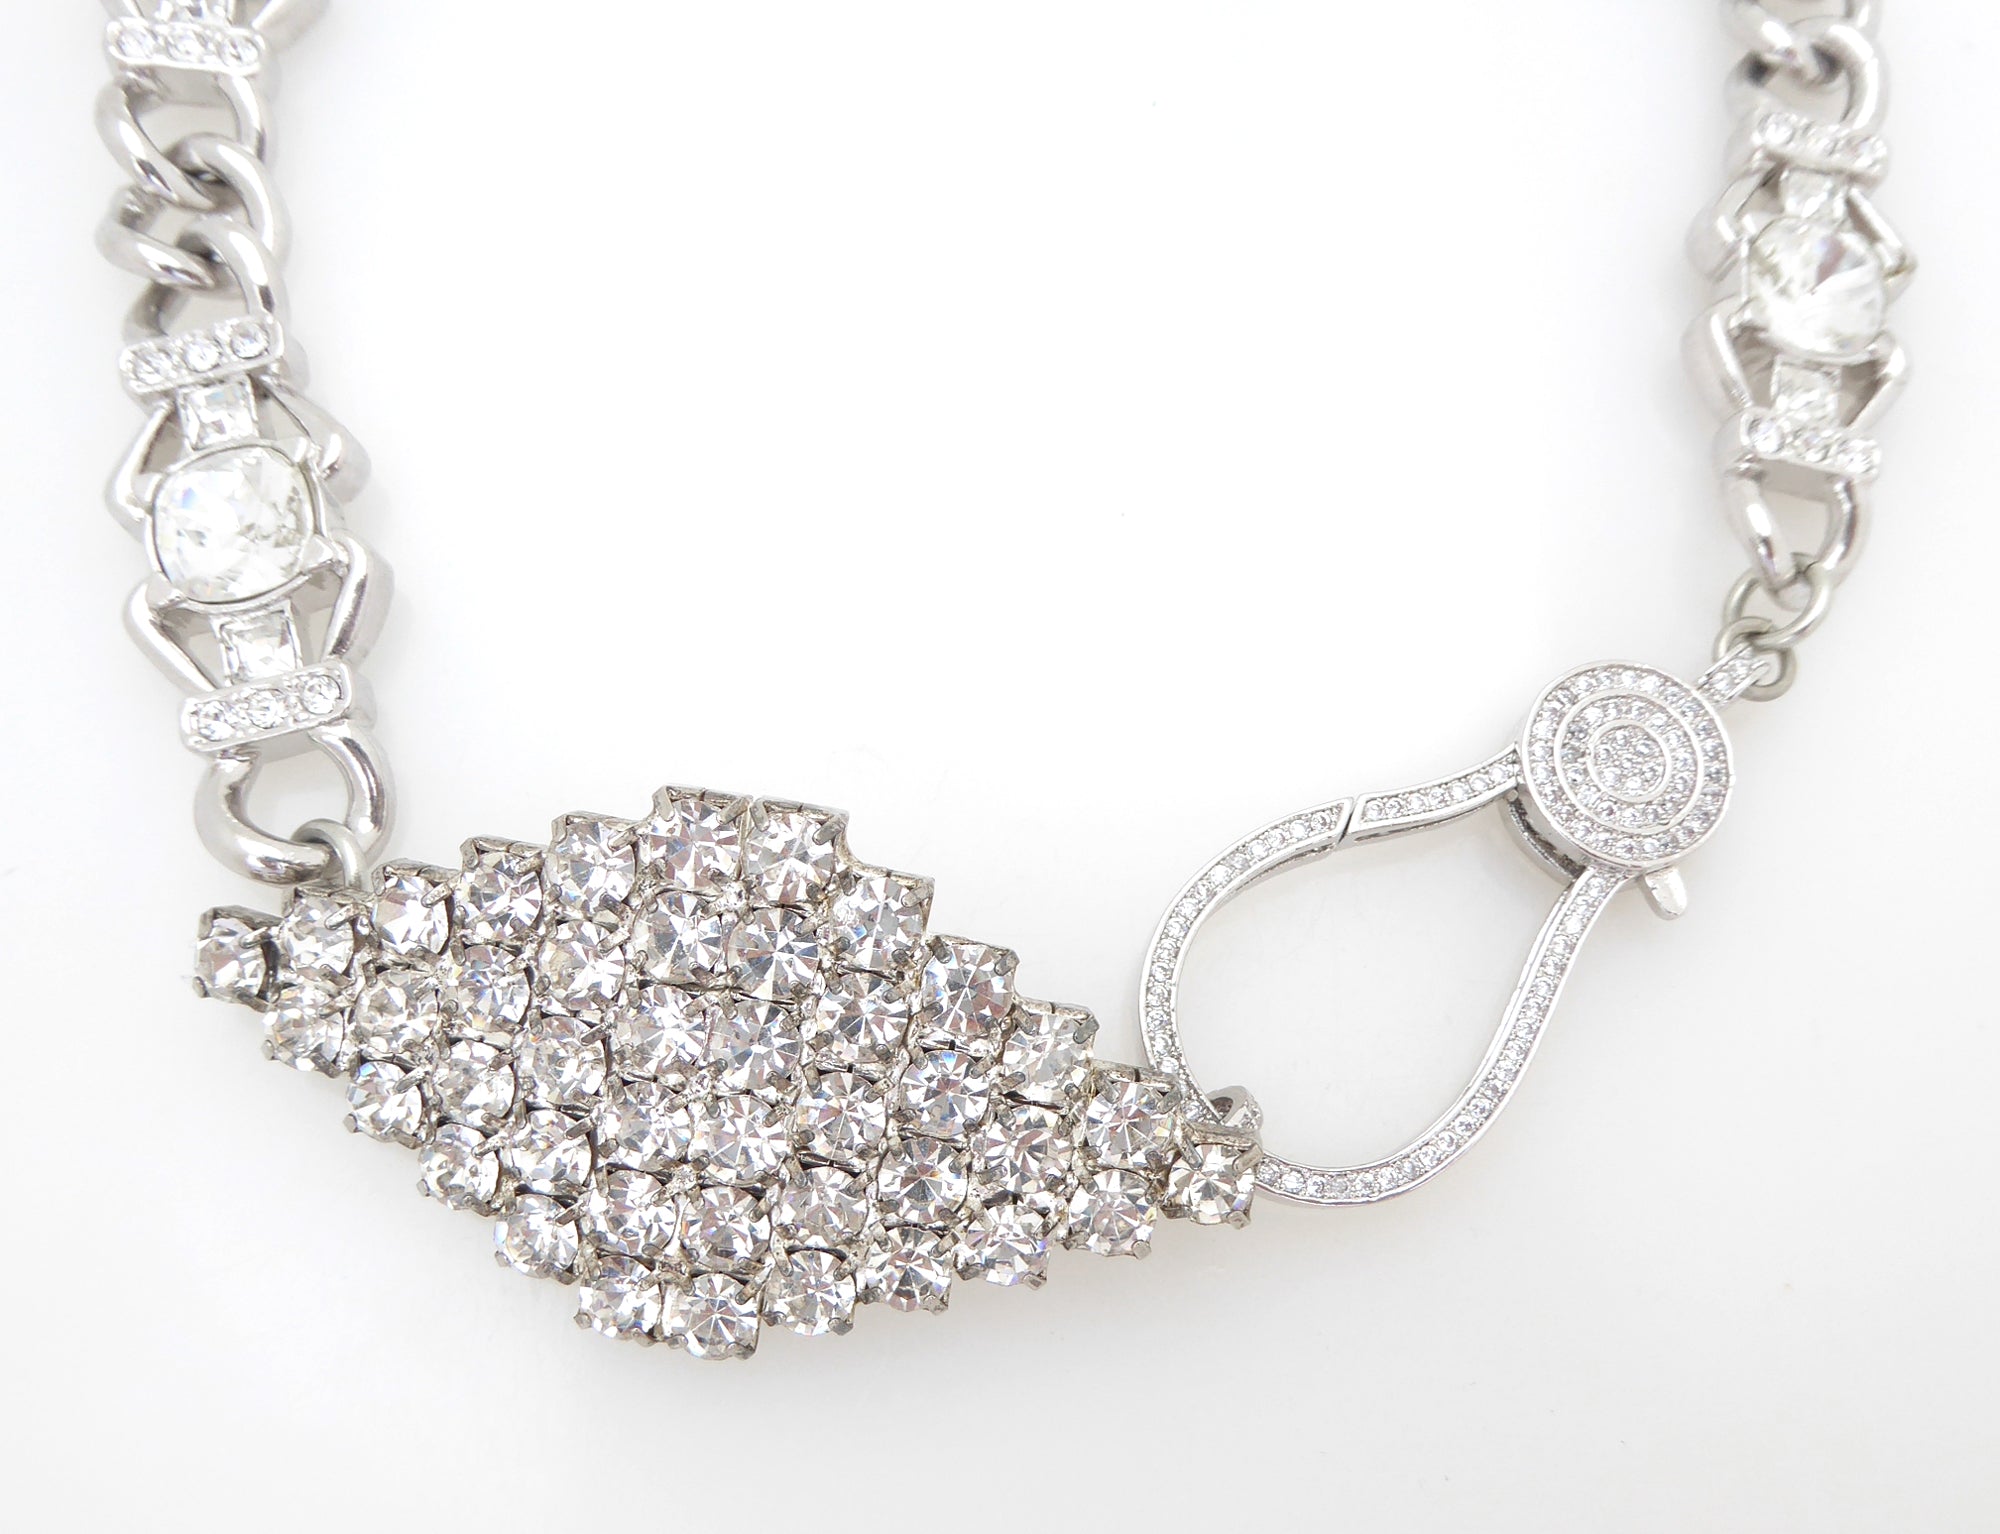 Ghiaccio silver rhinestone link and clasp necklace by Jenny Dayco 4